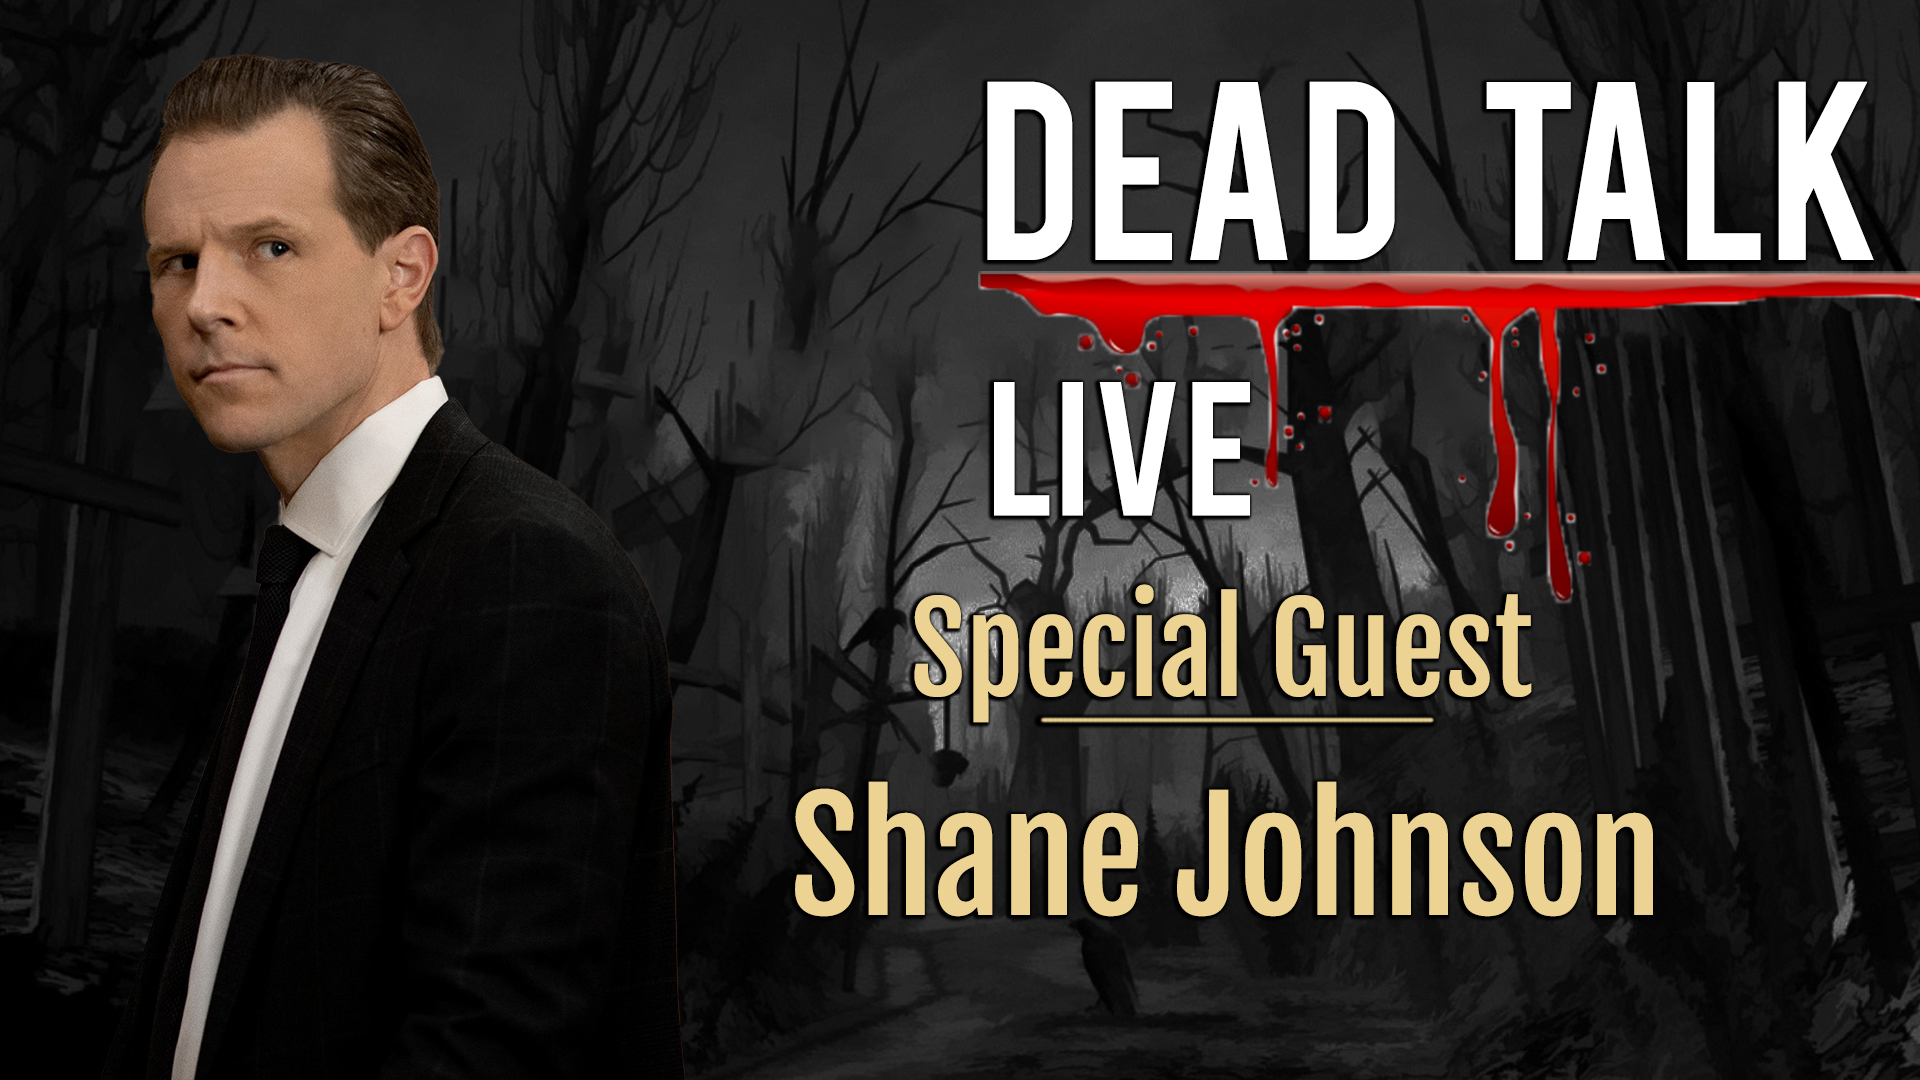 Shane Johnson is our Special Guest